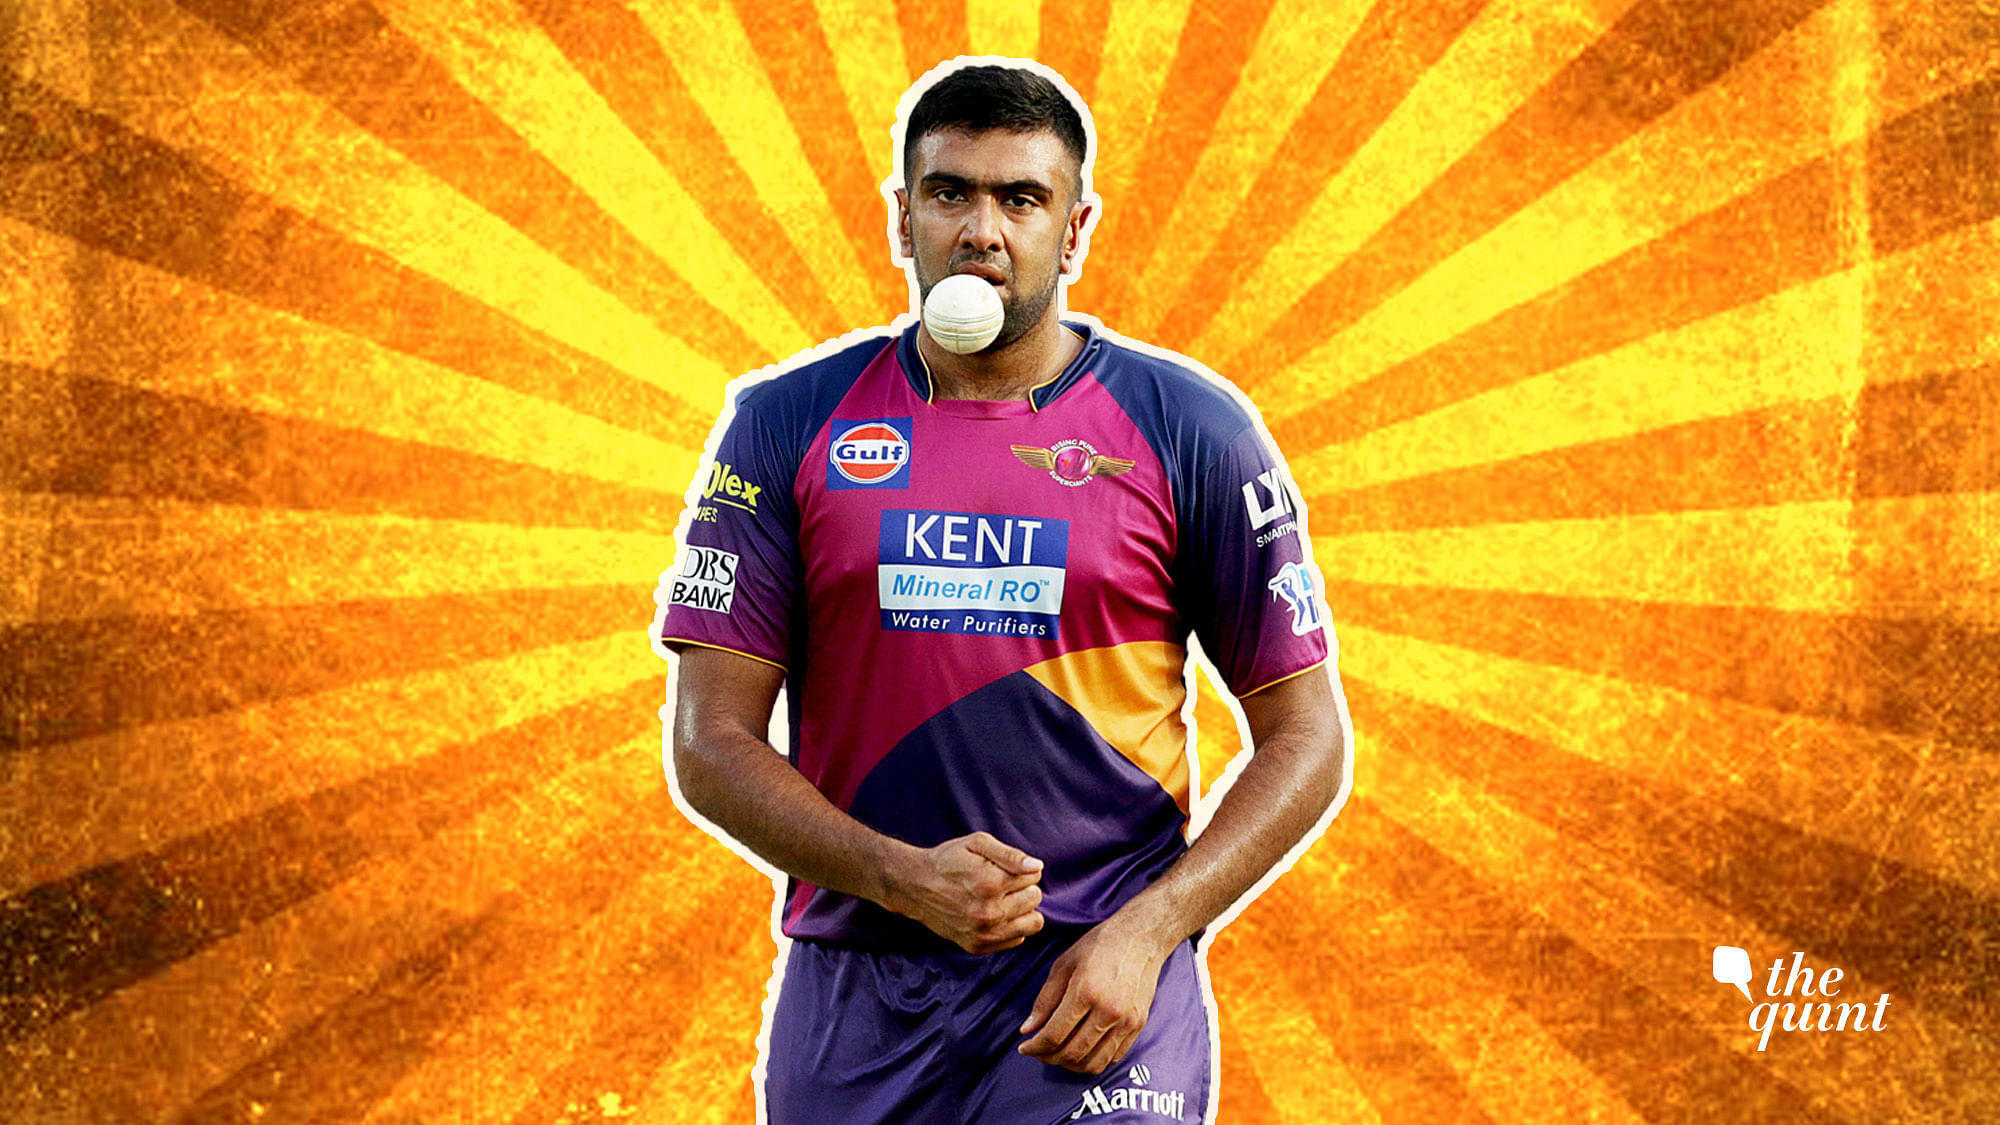 Why did the Ravichandran Ashwin, who was dropped from India’s ODI team, turn up for Tamil Nadu in the Vijay Hazare trophy and bowl leg breaks?